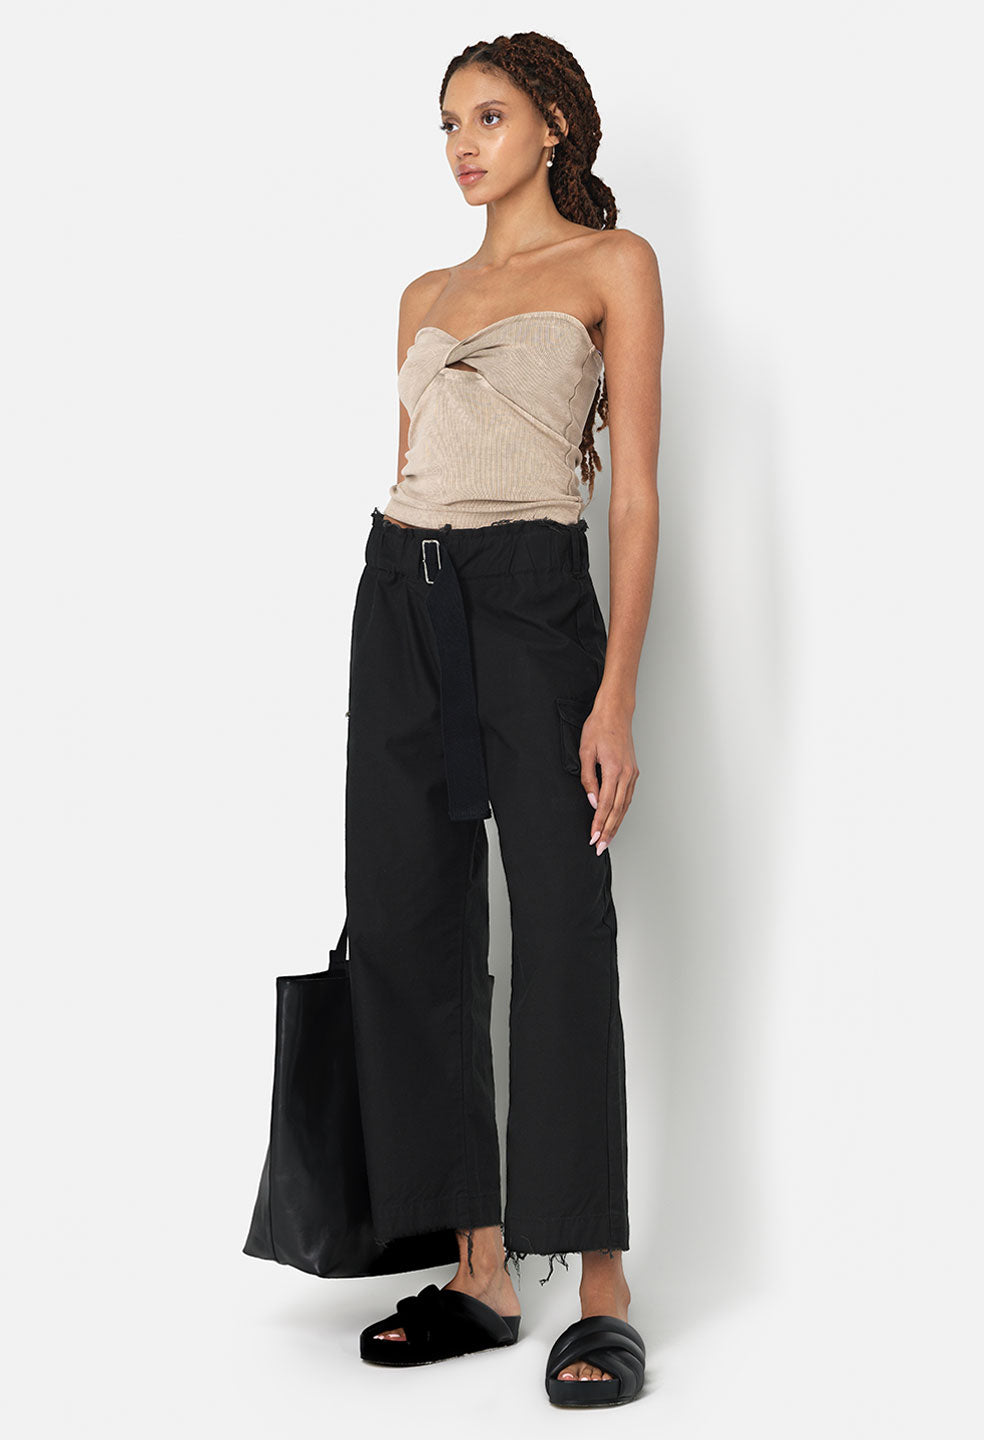 Wide Leg Pants for Women Summer Casual Baggy Elastic Waist Belted Ankle  Pants Solid Color Palazzo Pants Trousers Womens Clothes - Walmart.com